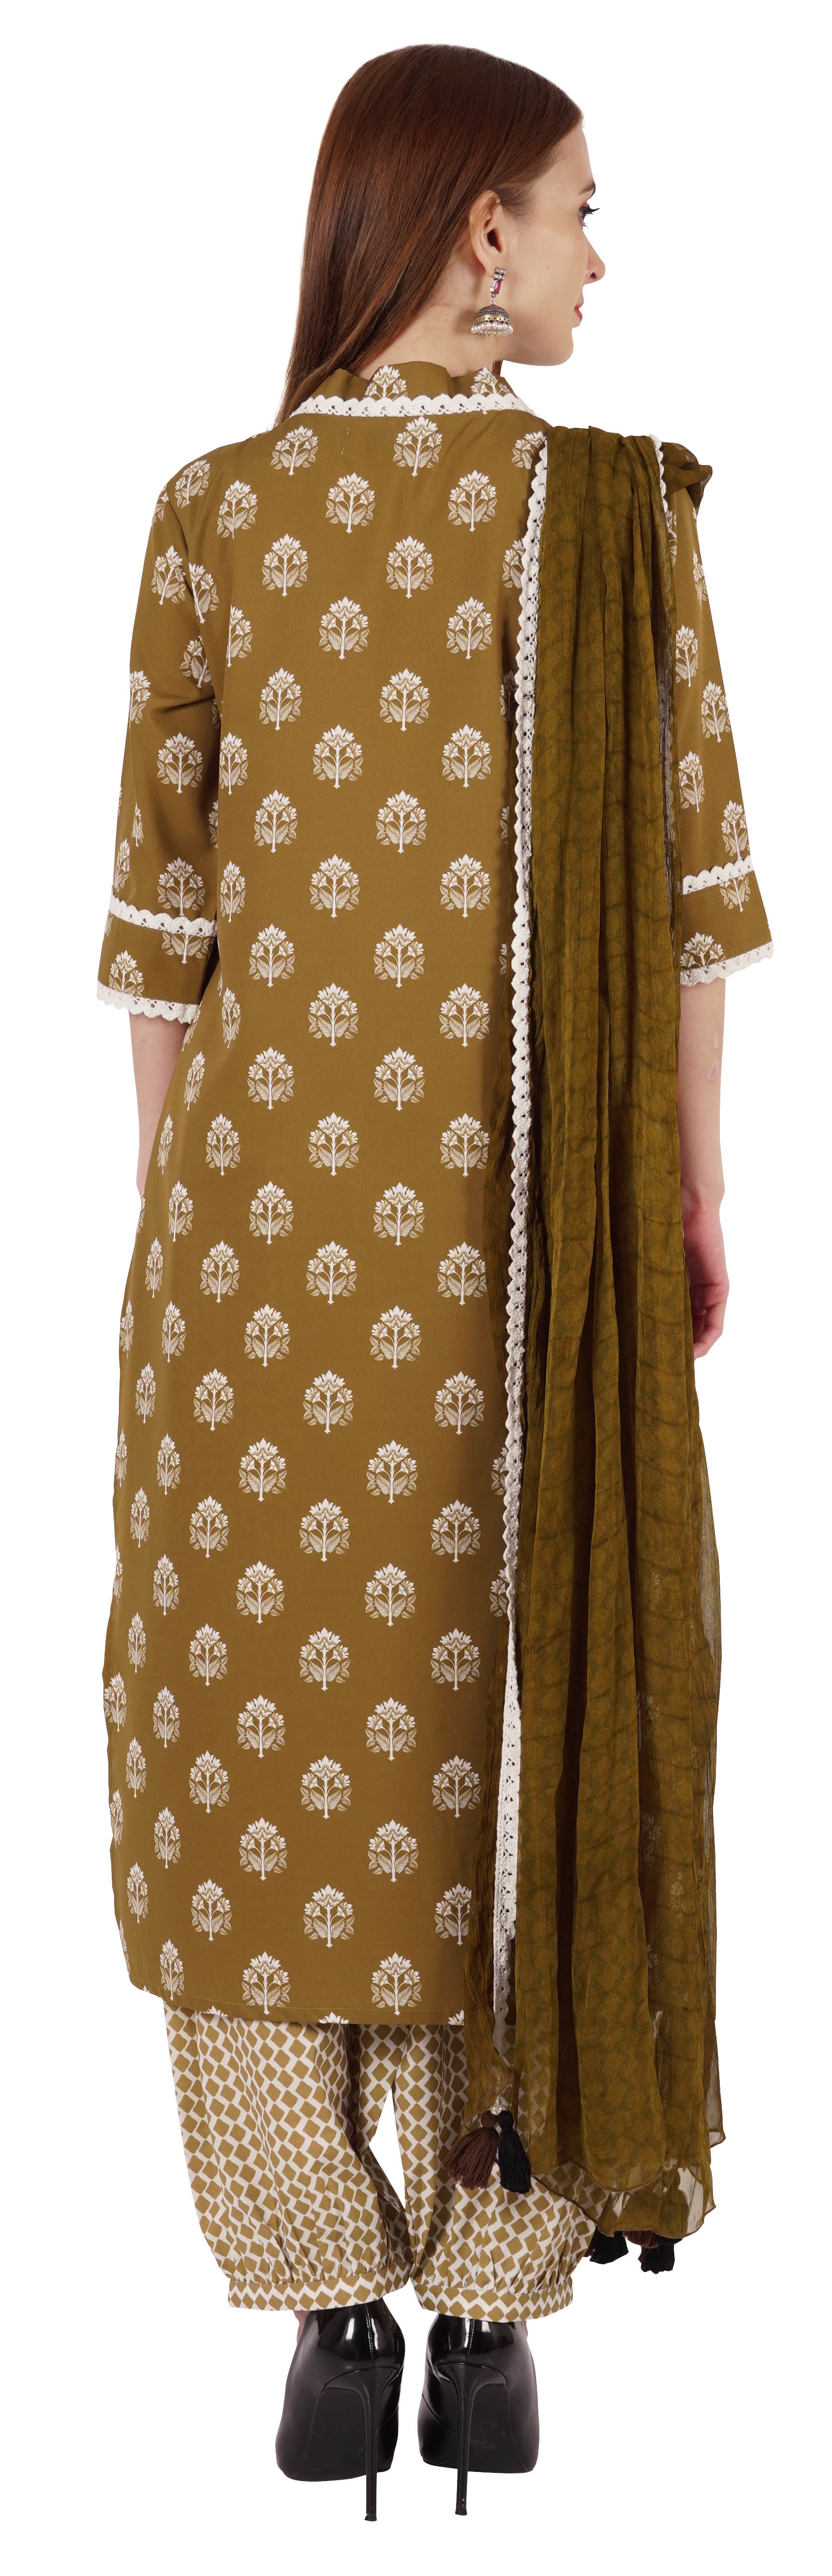 Buy FASHIRE Women's Straight Cotton Silk Stitched Kurta Set With Dupatta ( Brown) (Small) at Amazon.in